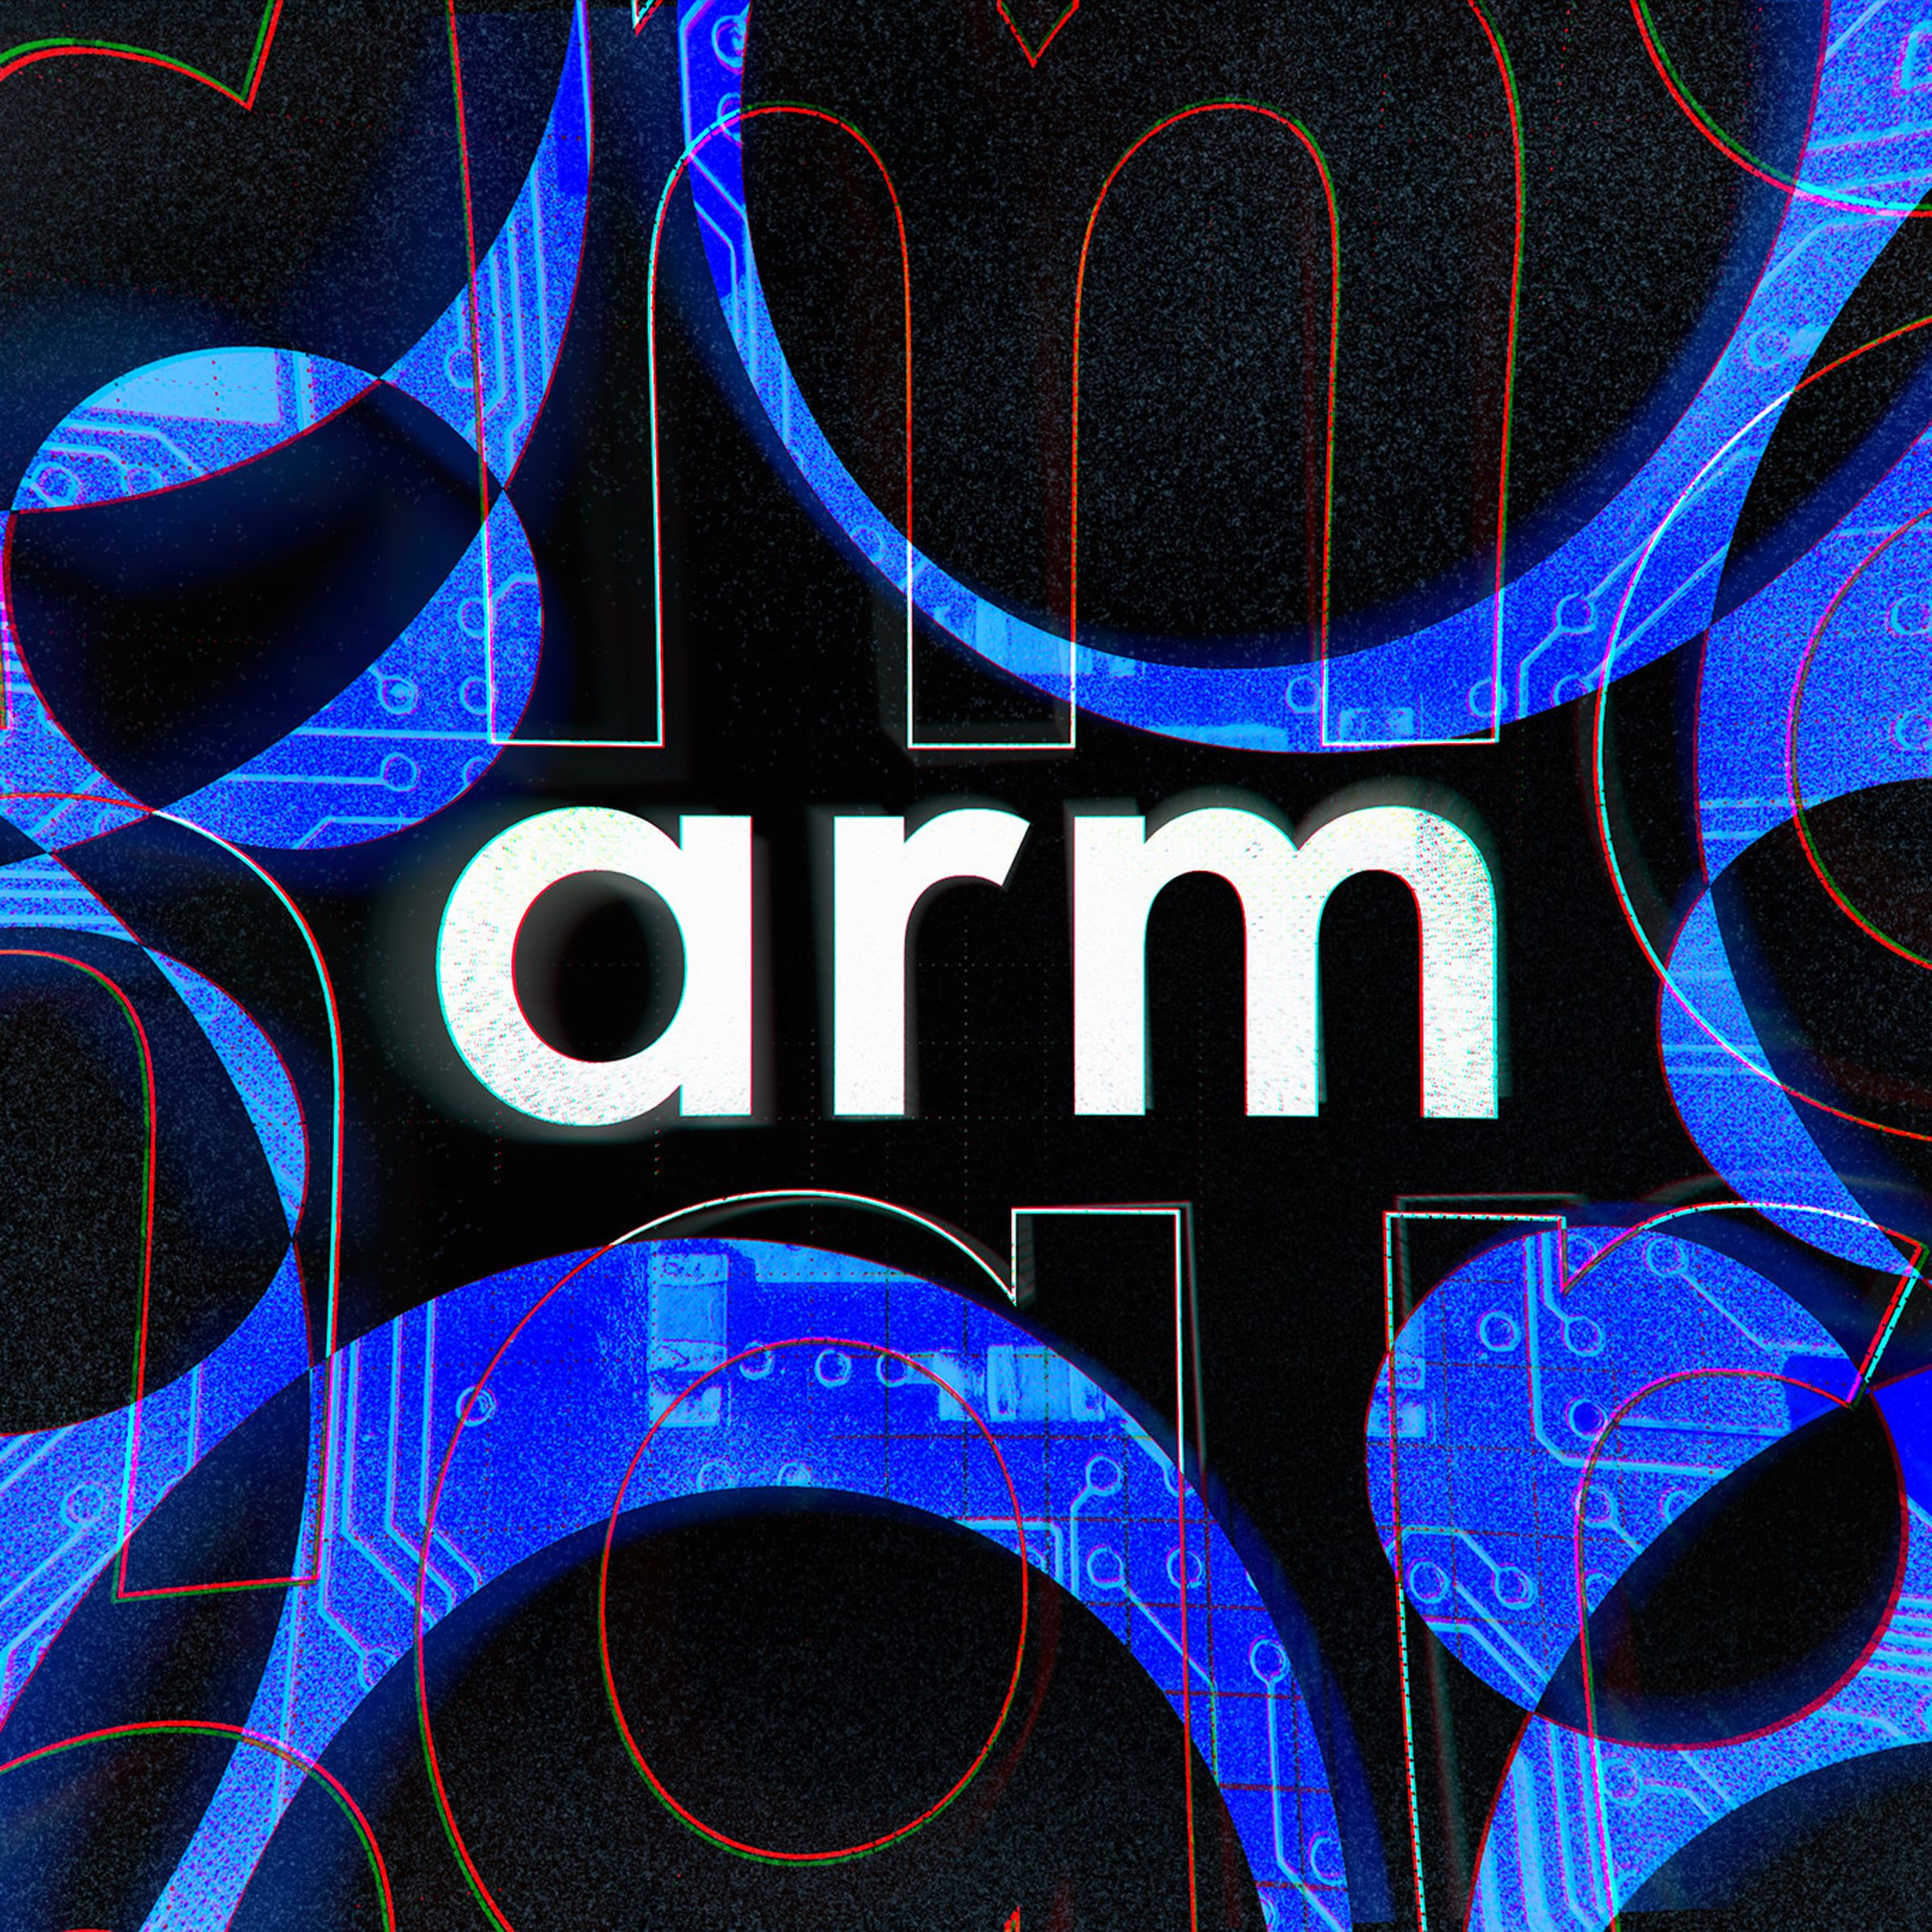 The word “arm” is superimposed on a psychedelic background